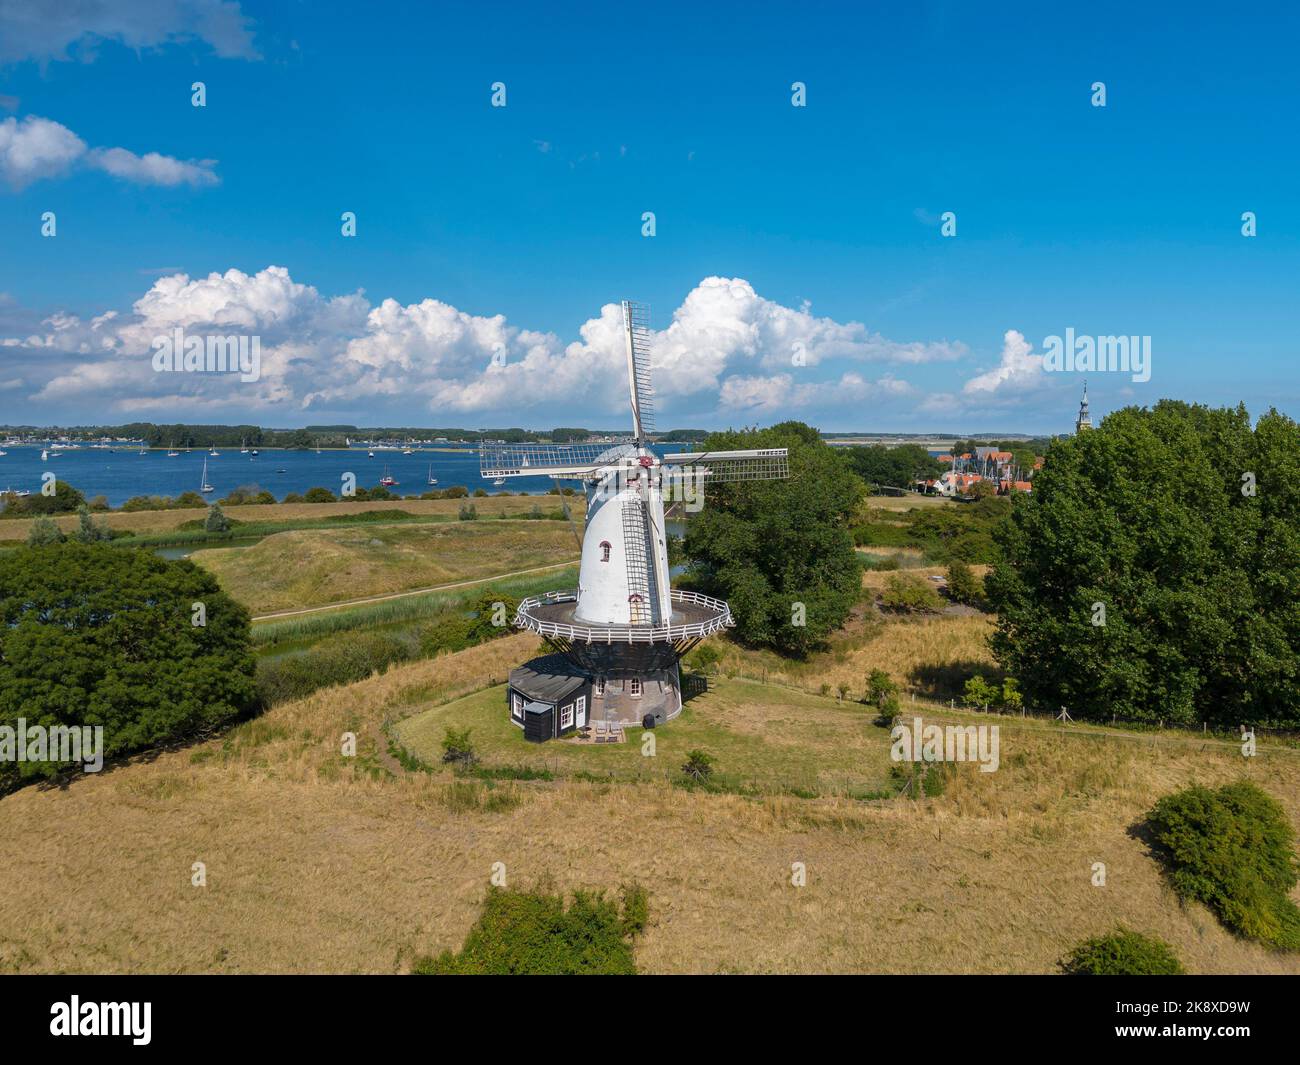 Aerial view with the windmill De Koe, in the background the Veerse Meer, Veere, Zeeland, Netherlands, Europe Stock Photo